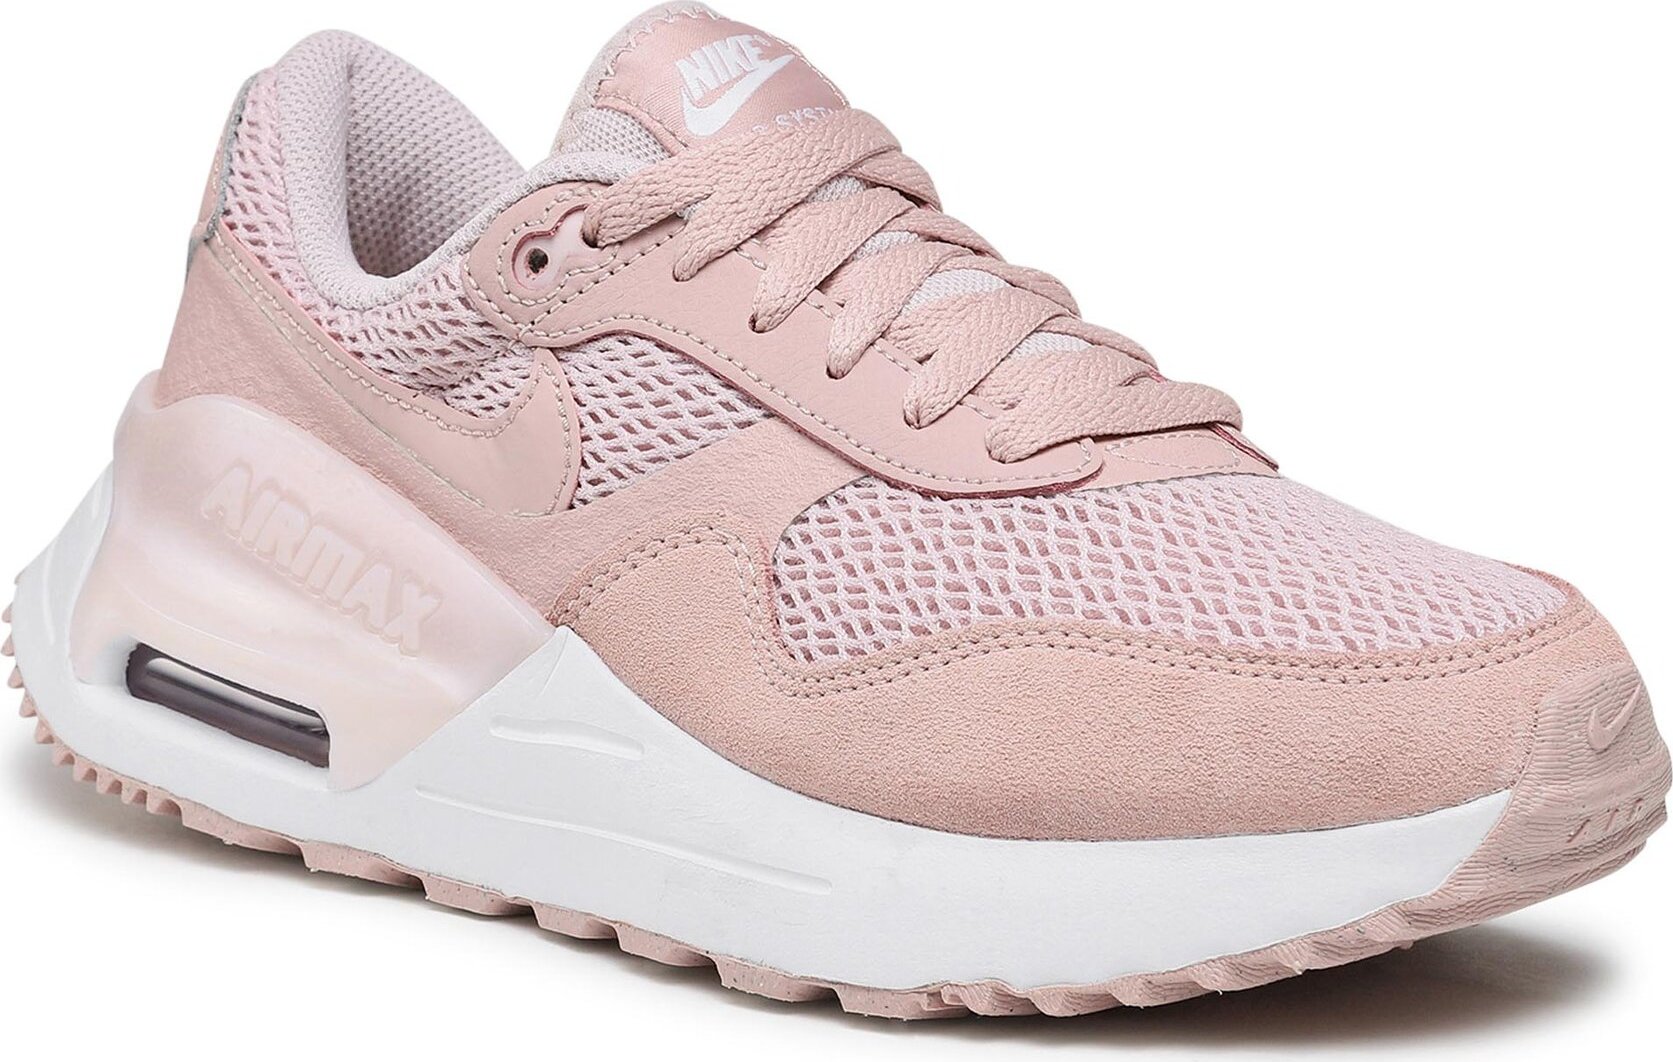 Boty Nike Air Max System DM9538-600 Barely Rose/Pink Oxford/Oxford Rose